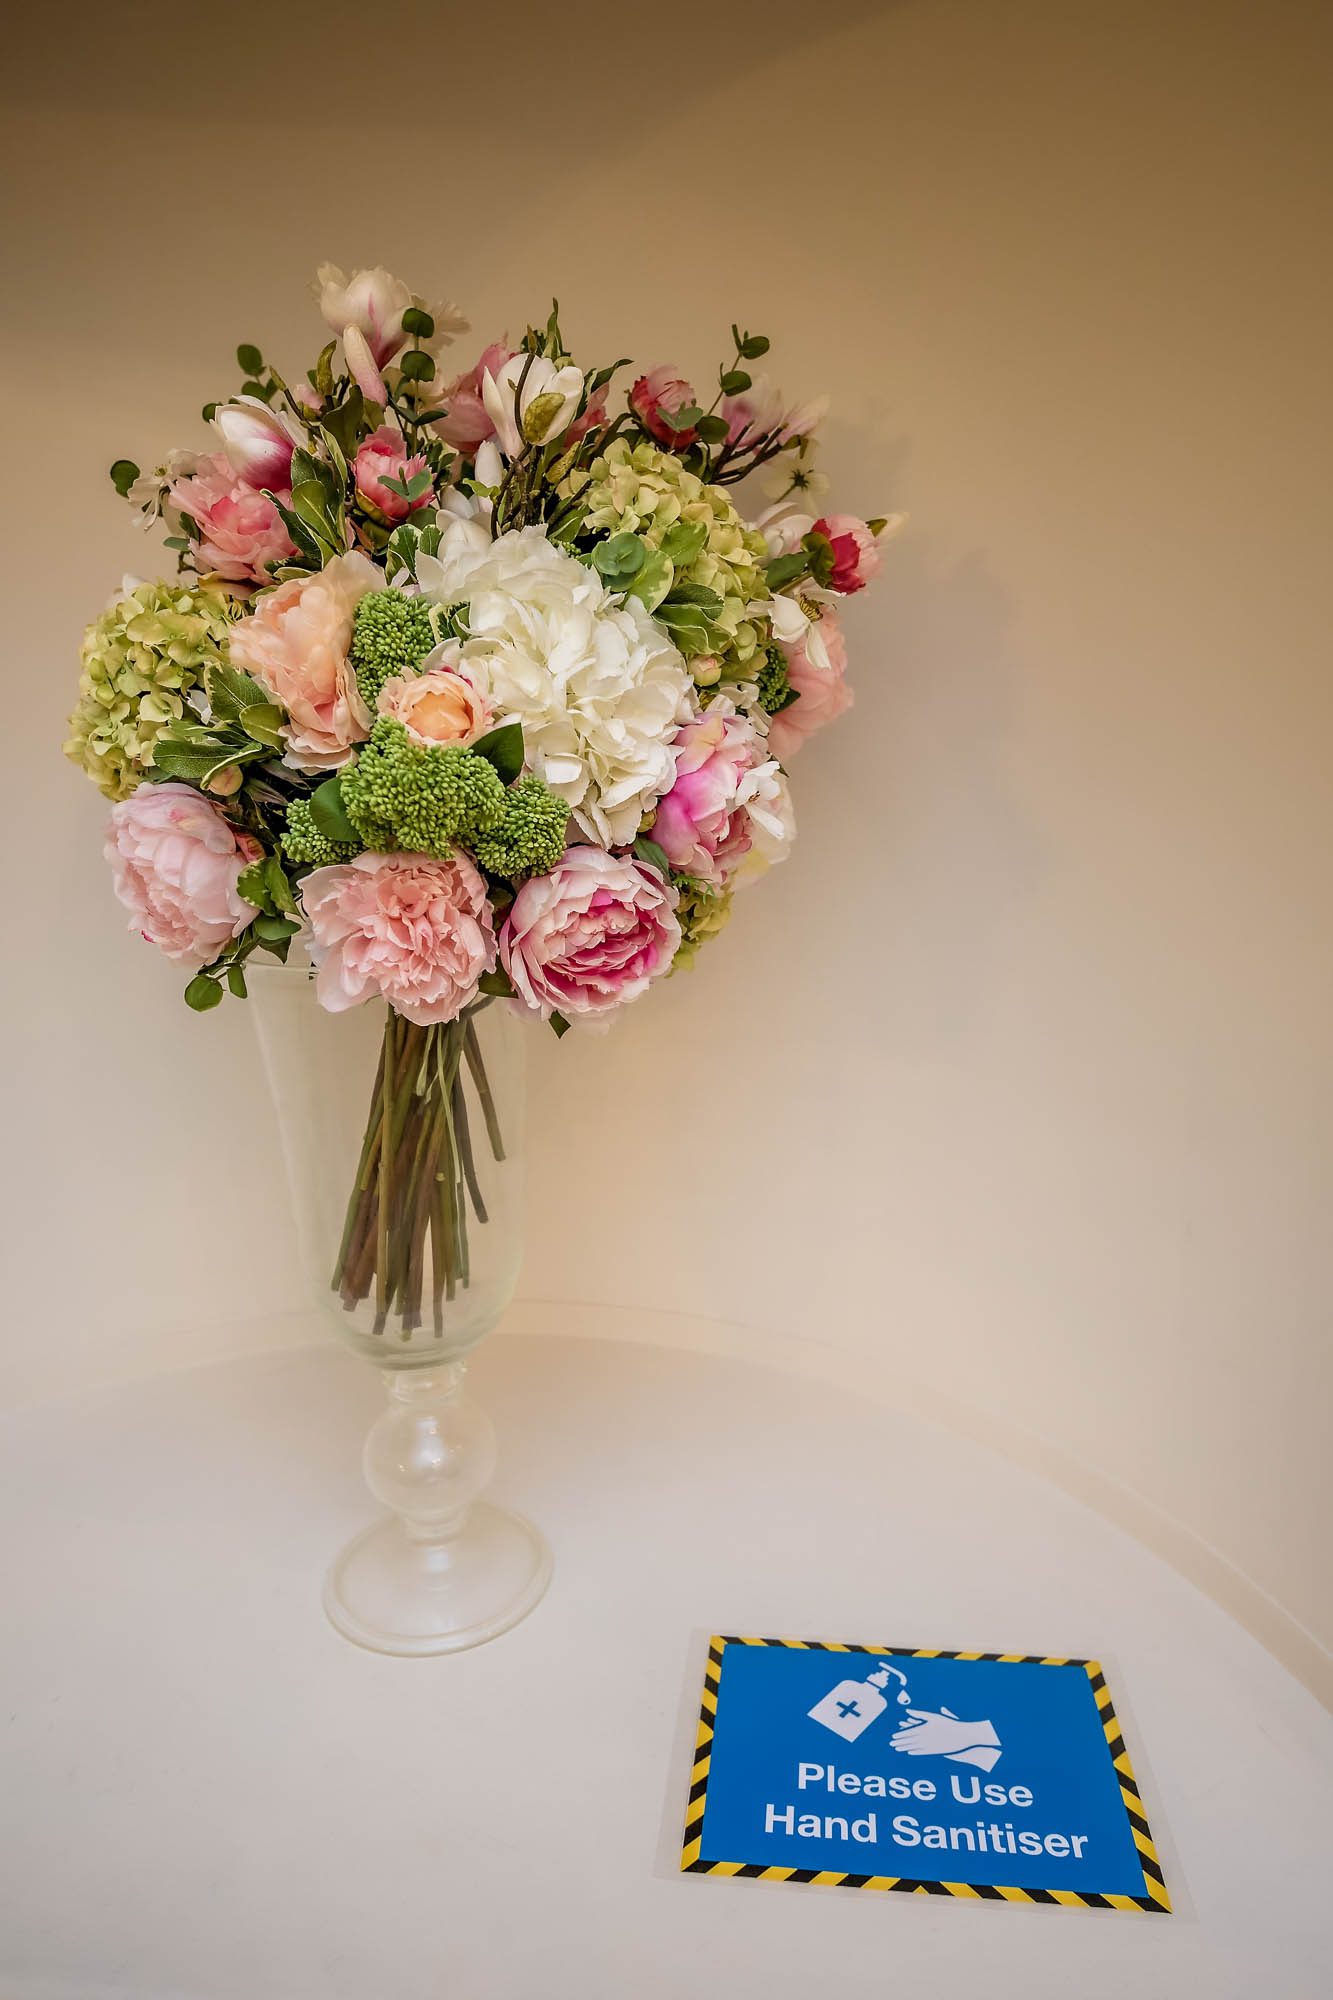 Wedding bouquet in glass vase with blue 'Please Use Hand Sanitiser' sign.